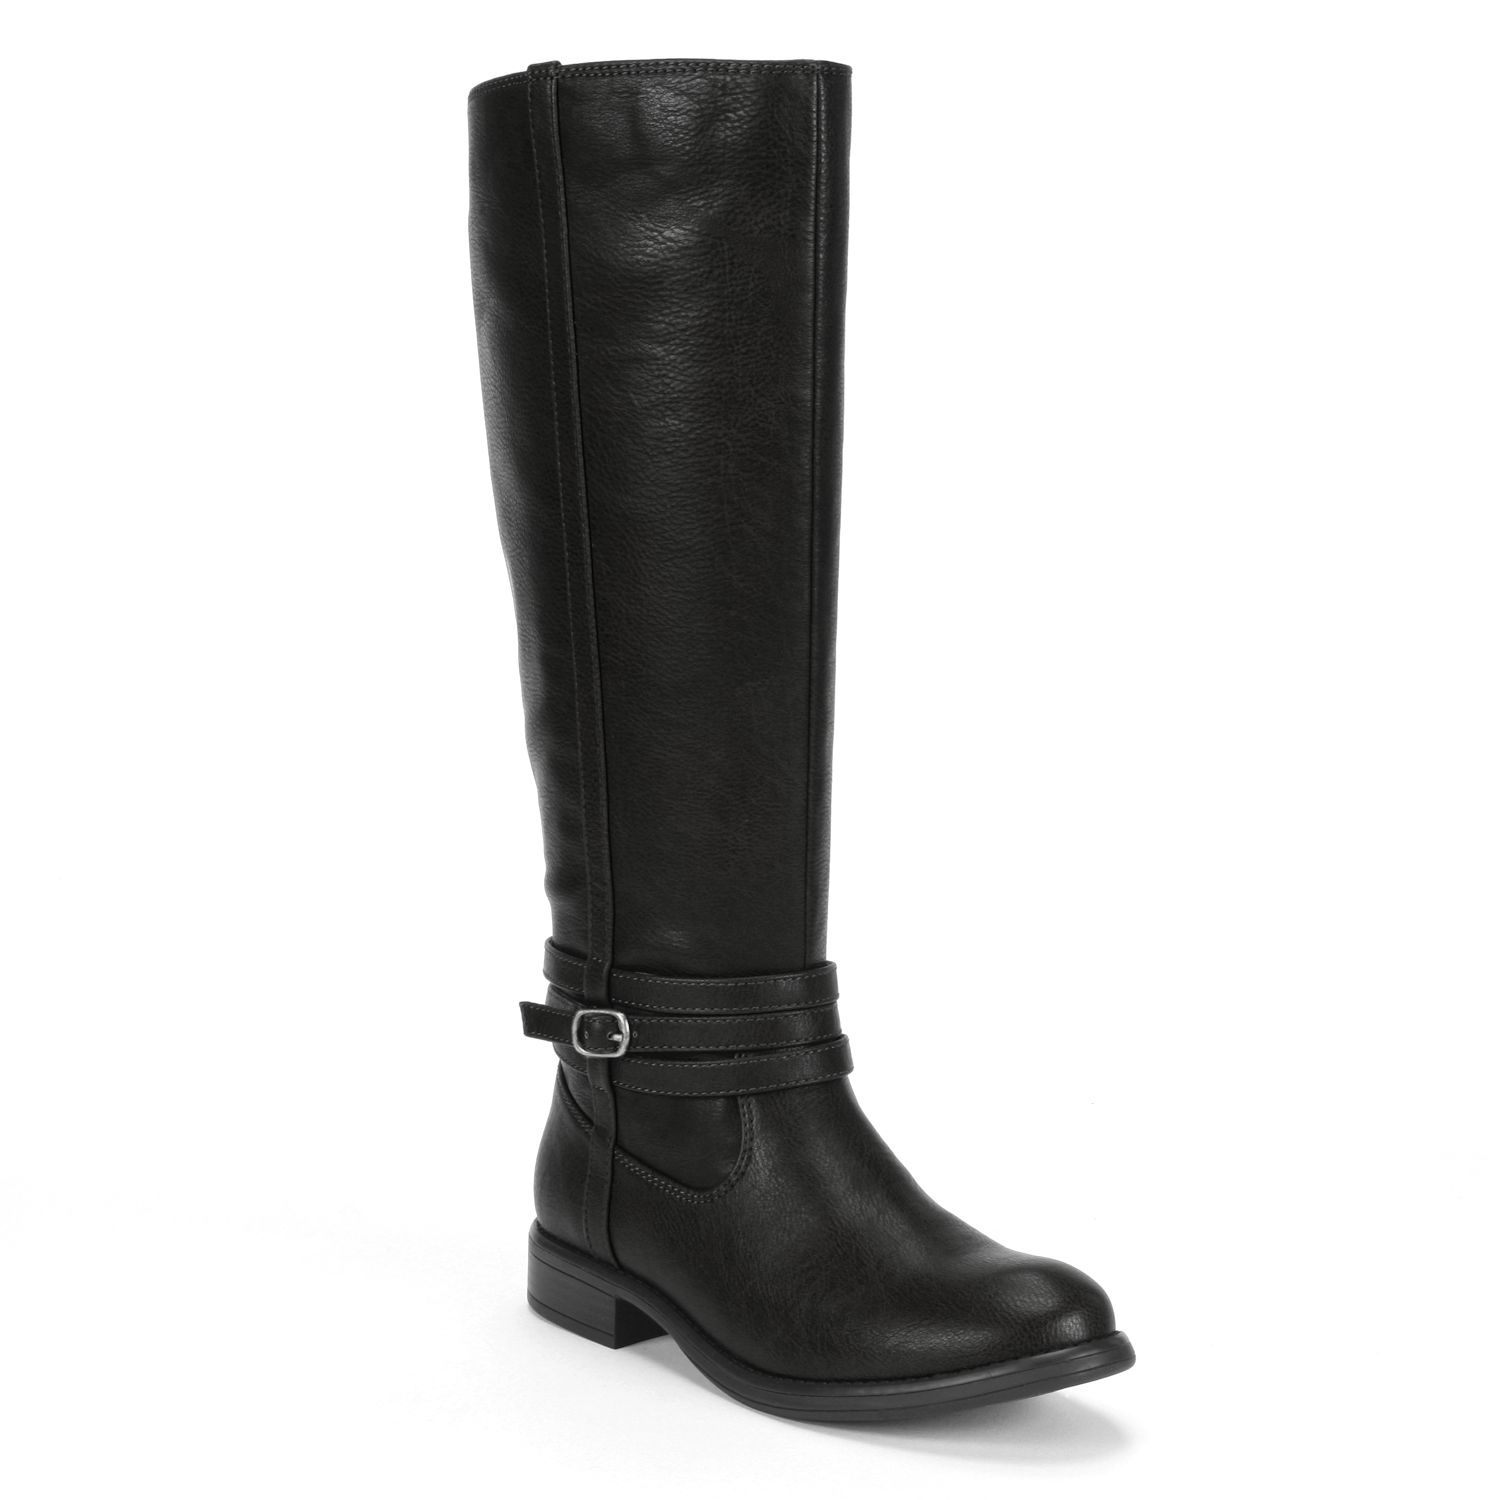 real leather riding boots womens